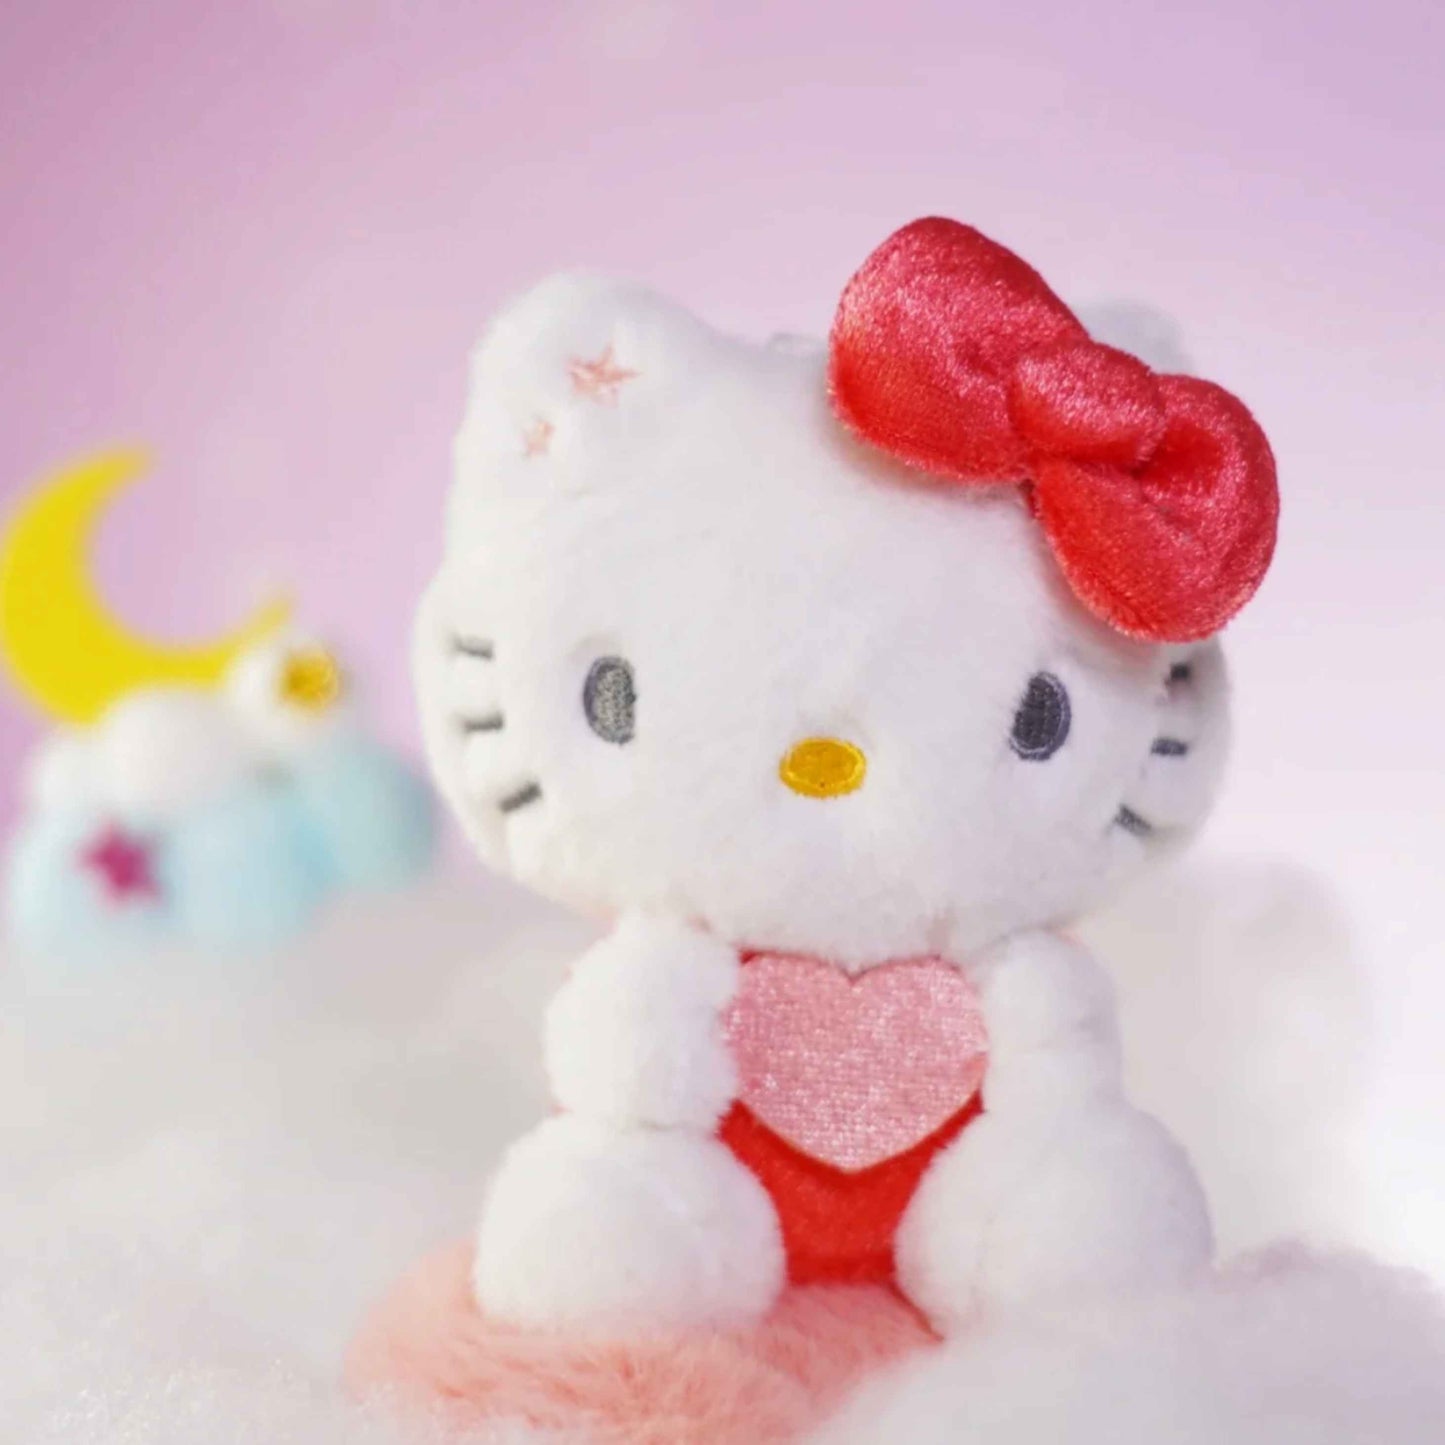 【Restock】Top Toy Sanrio Characters Starry Cloud Plush Blind Box Random Style